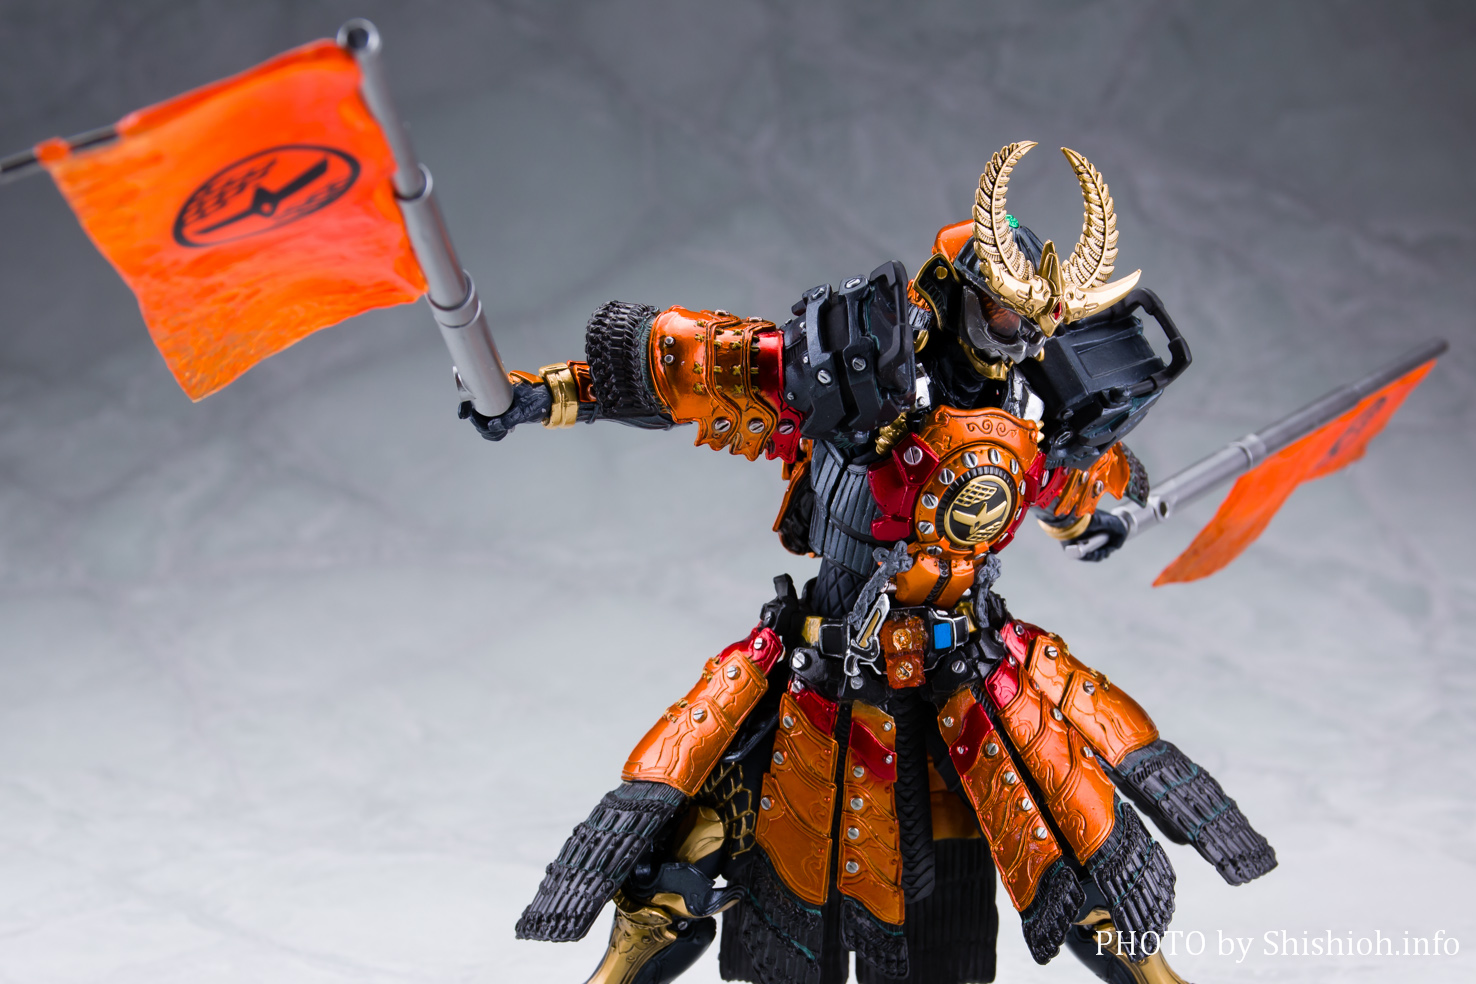 S.I.C. 仮面ライダー鎧武 カチドキアームズ